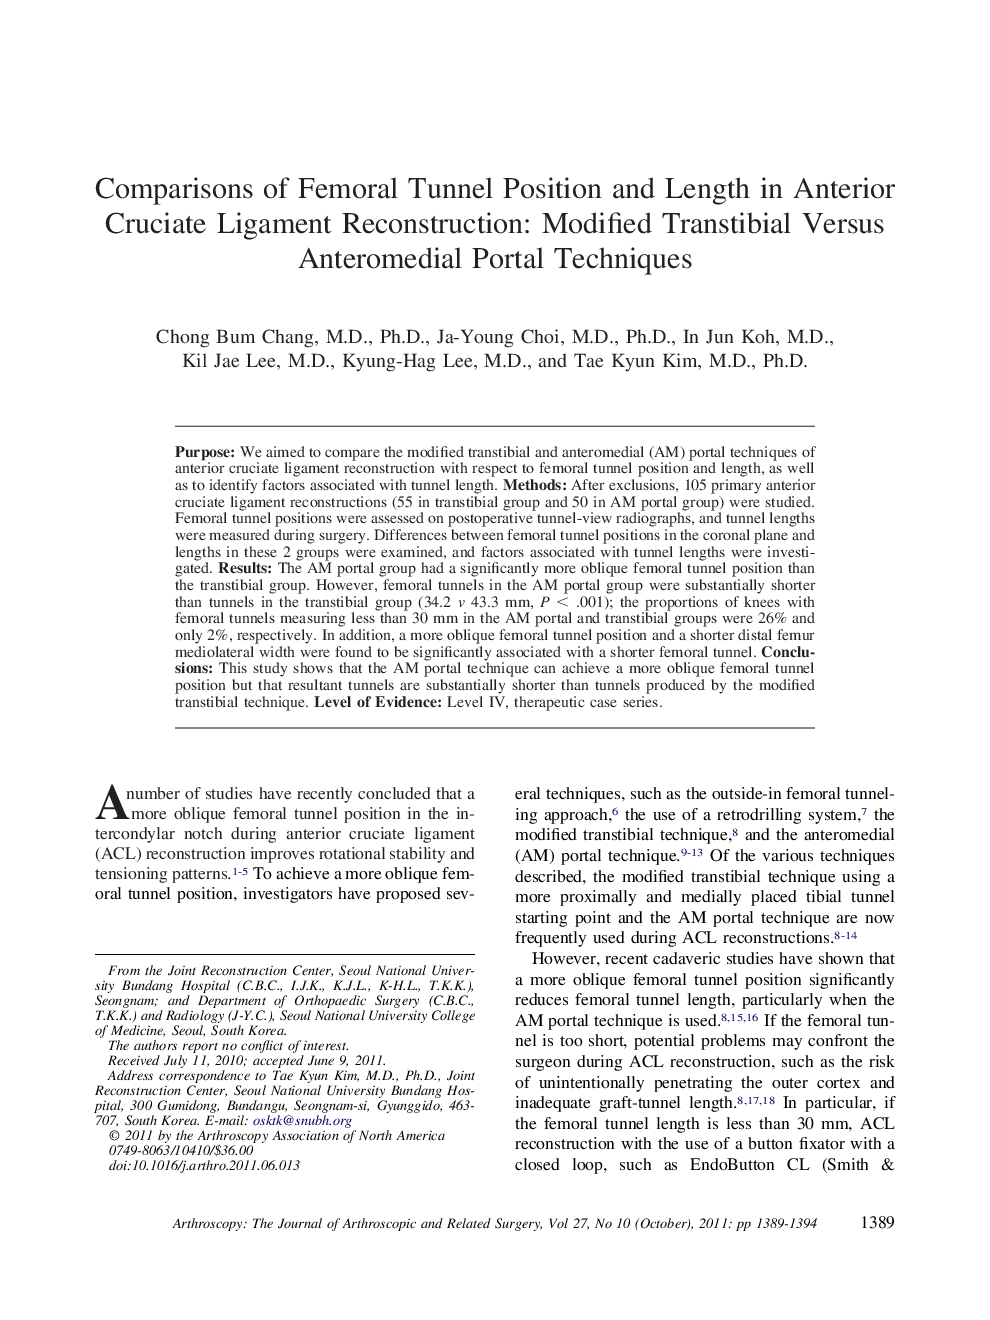 Comparisons of Femoral Tunnel Position and Length in Anterior Cruciate Ligament Reconstruction: Modified Transtibial Versus Anteromedial Portal Techniques 